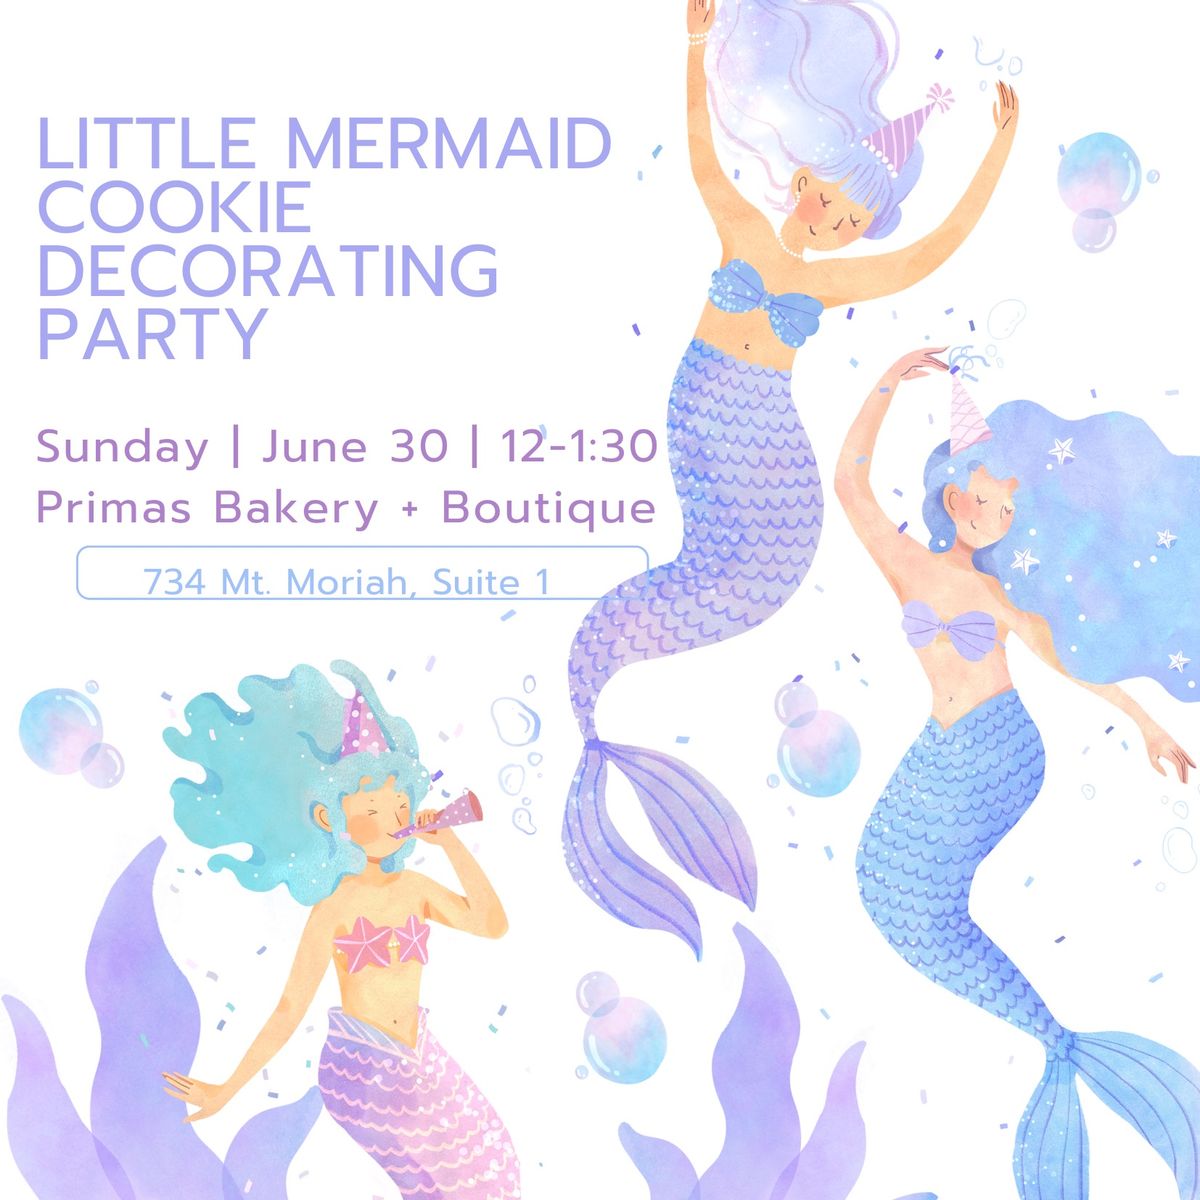 Little Mermaid Cookie Decorating Party